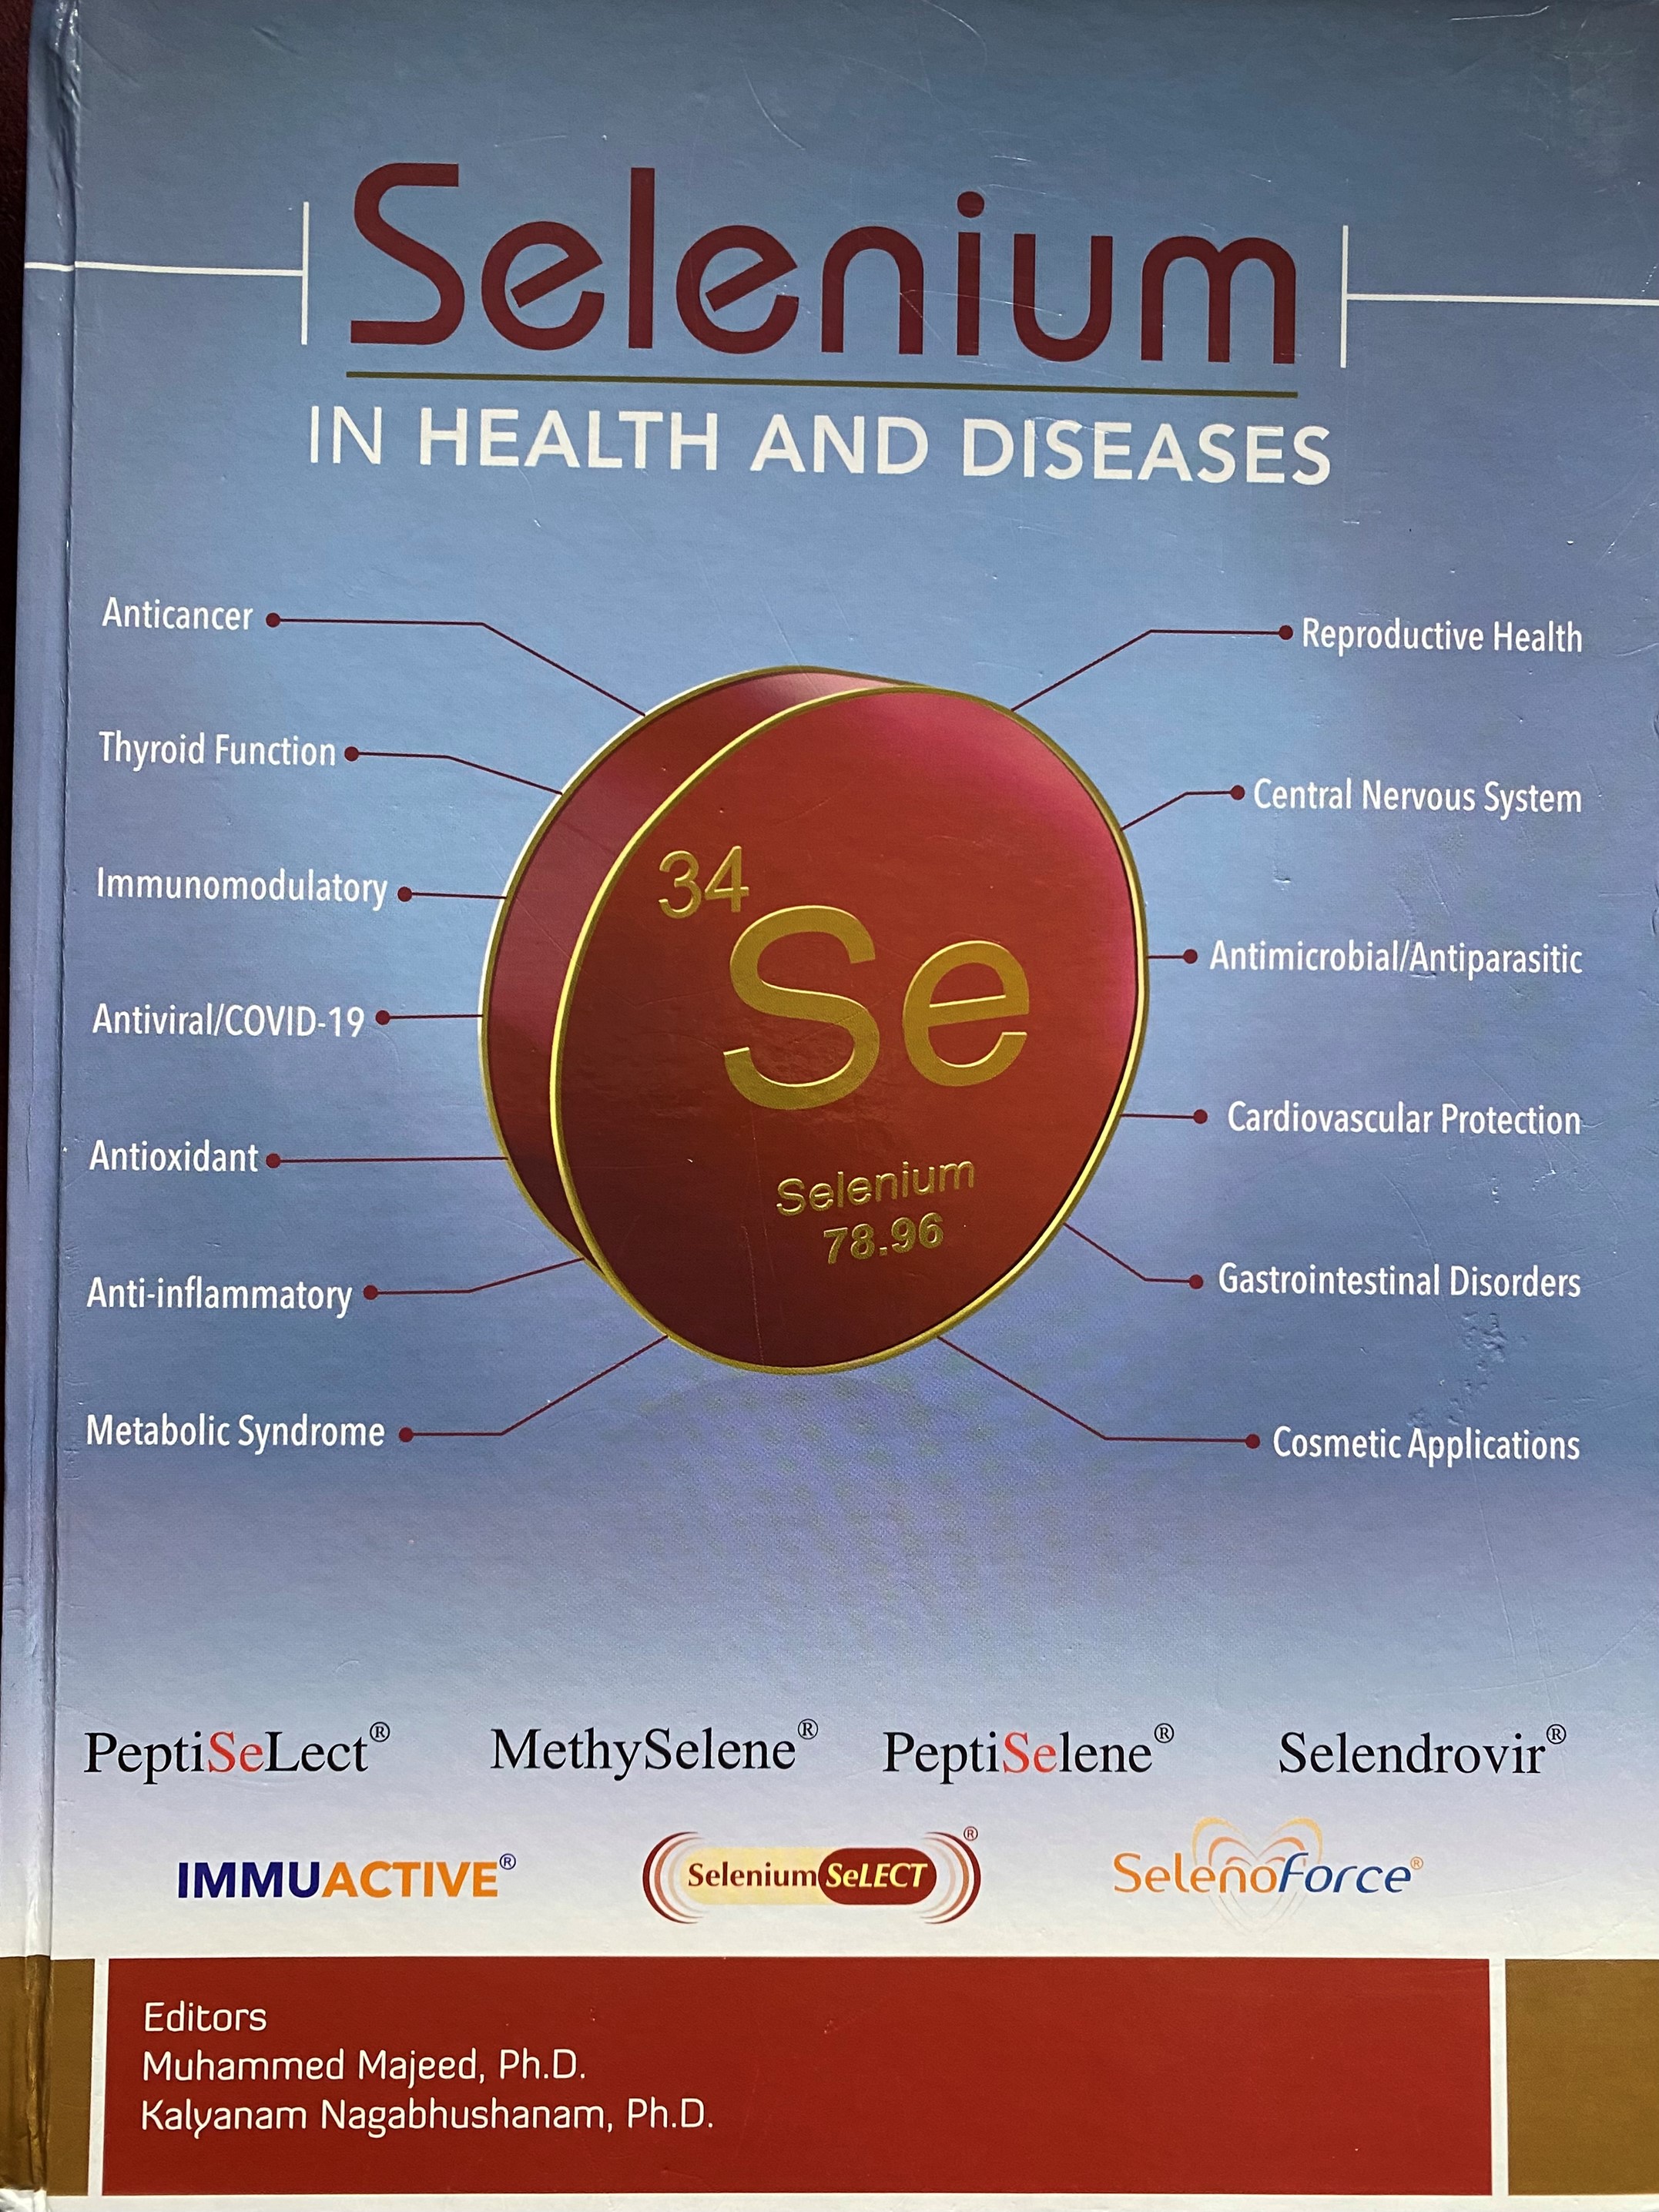 Sabinsa founder Dr Muhammed Majeed publishes book highlighting  selenium research